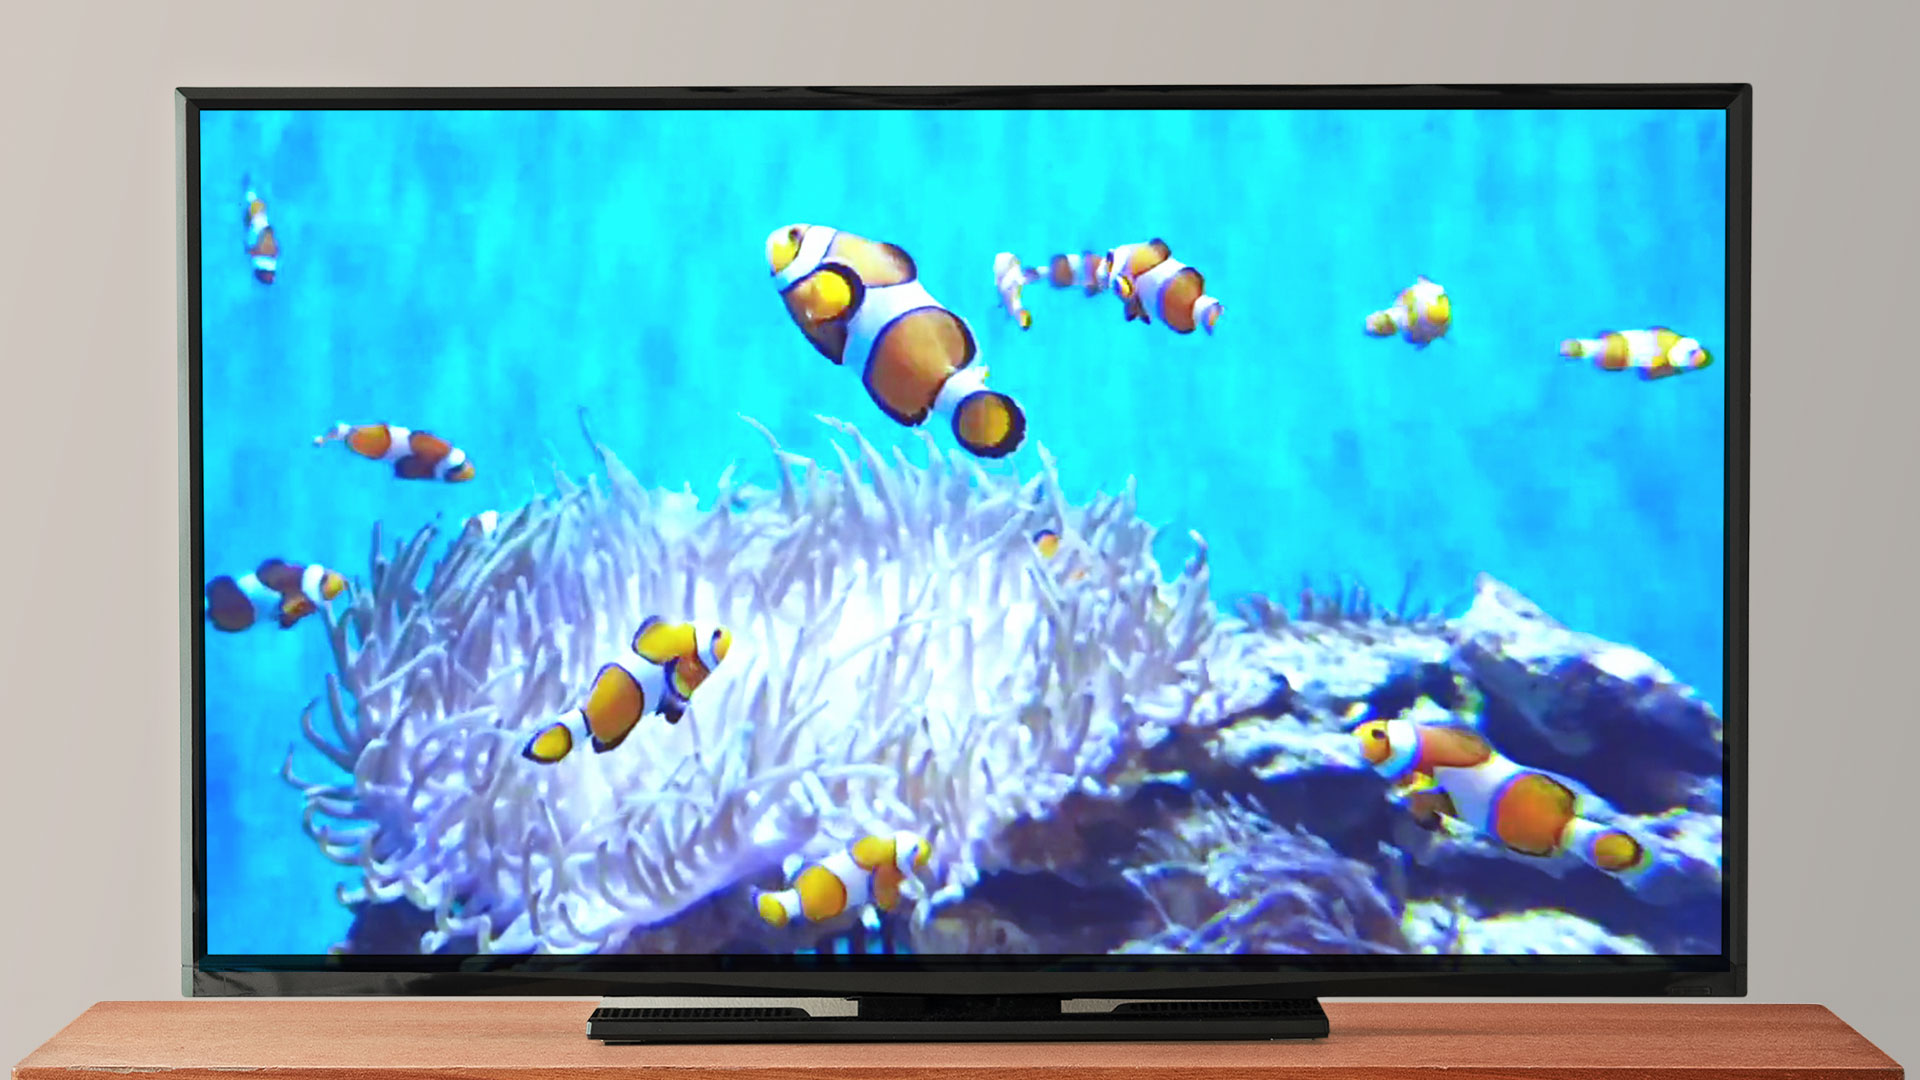 Amazing Aquariums In HD: Aquarium 4K VIDEO - Beautiful Coral Reef Fish - Relaxing Sleep Meditation Music Screensaver For Tablets And Fire TV - NO ADS